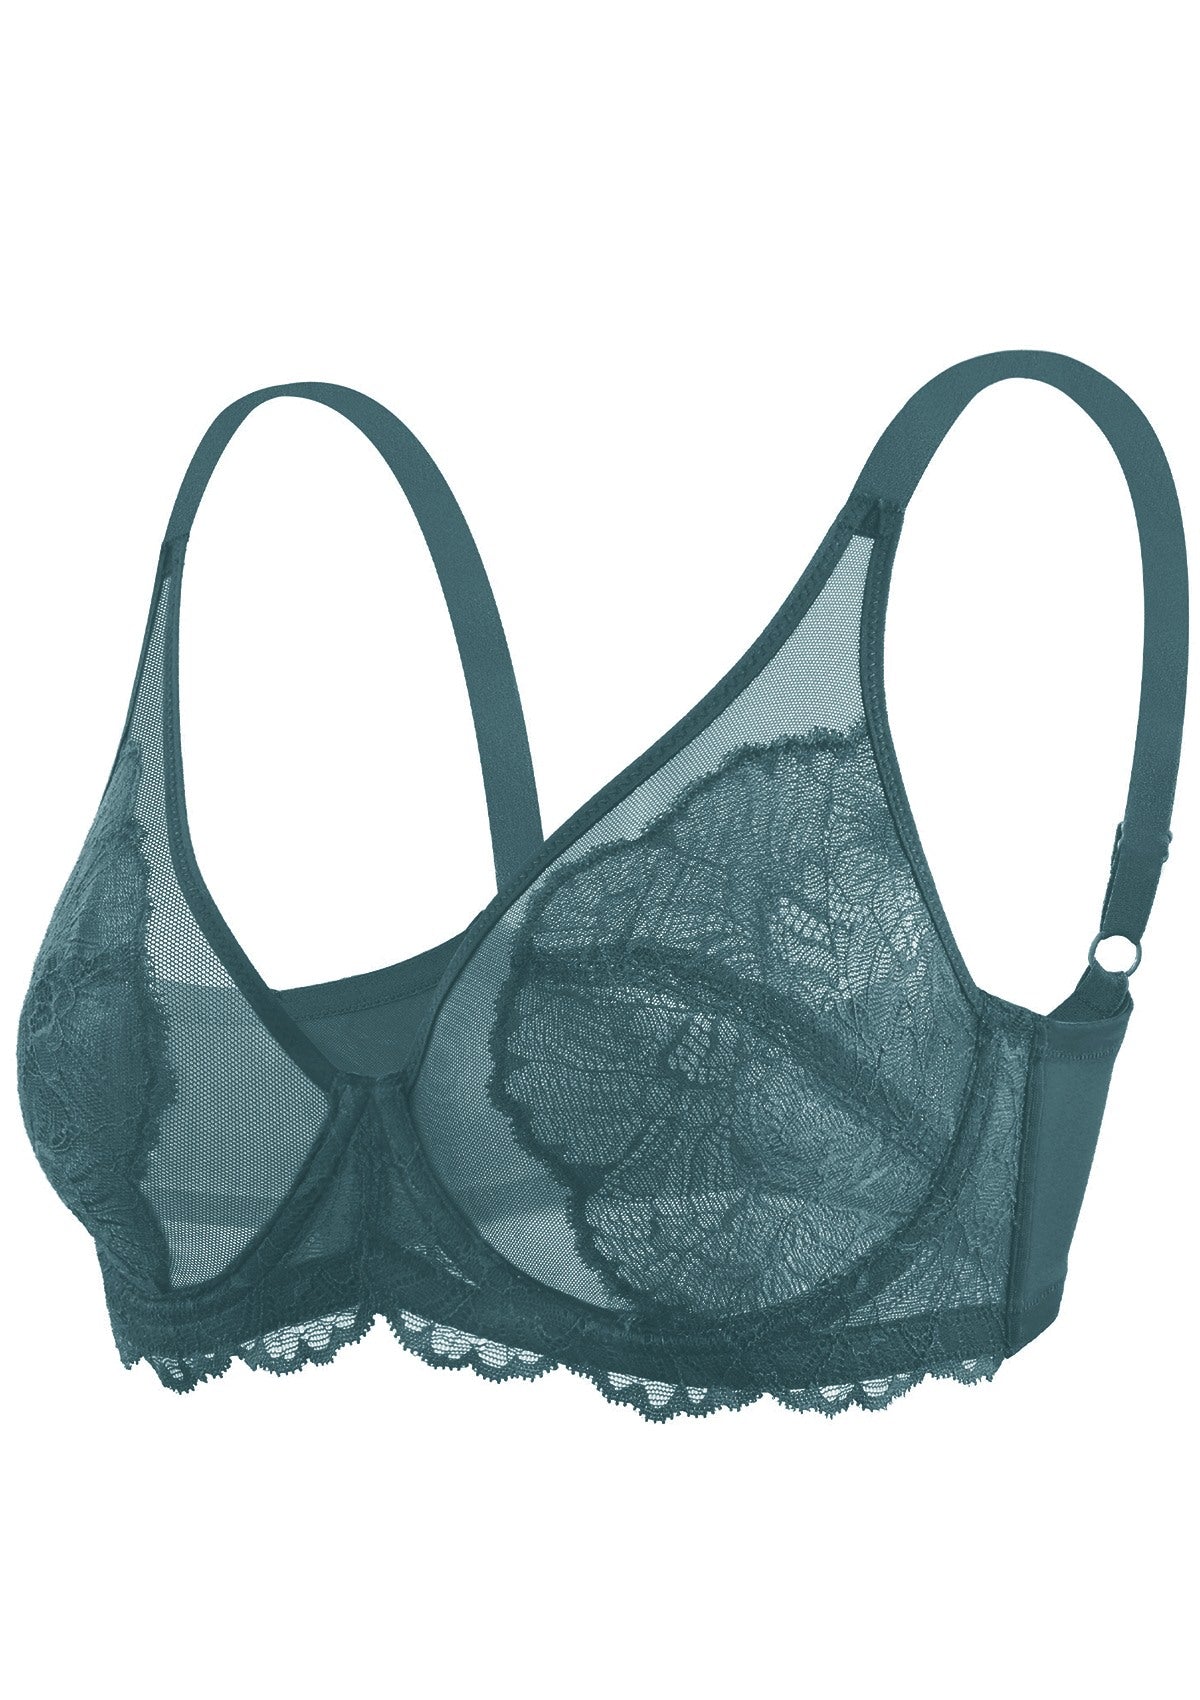 HSIA Blossom Full Figure See-Through Lace Bra For Side And Back Fat - Biscay Blue / 36 / C